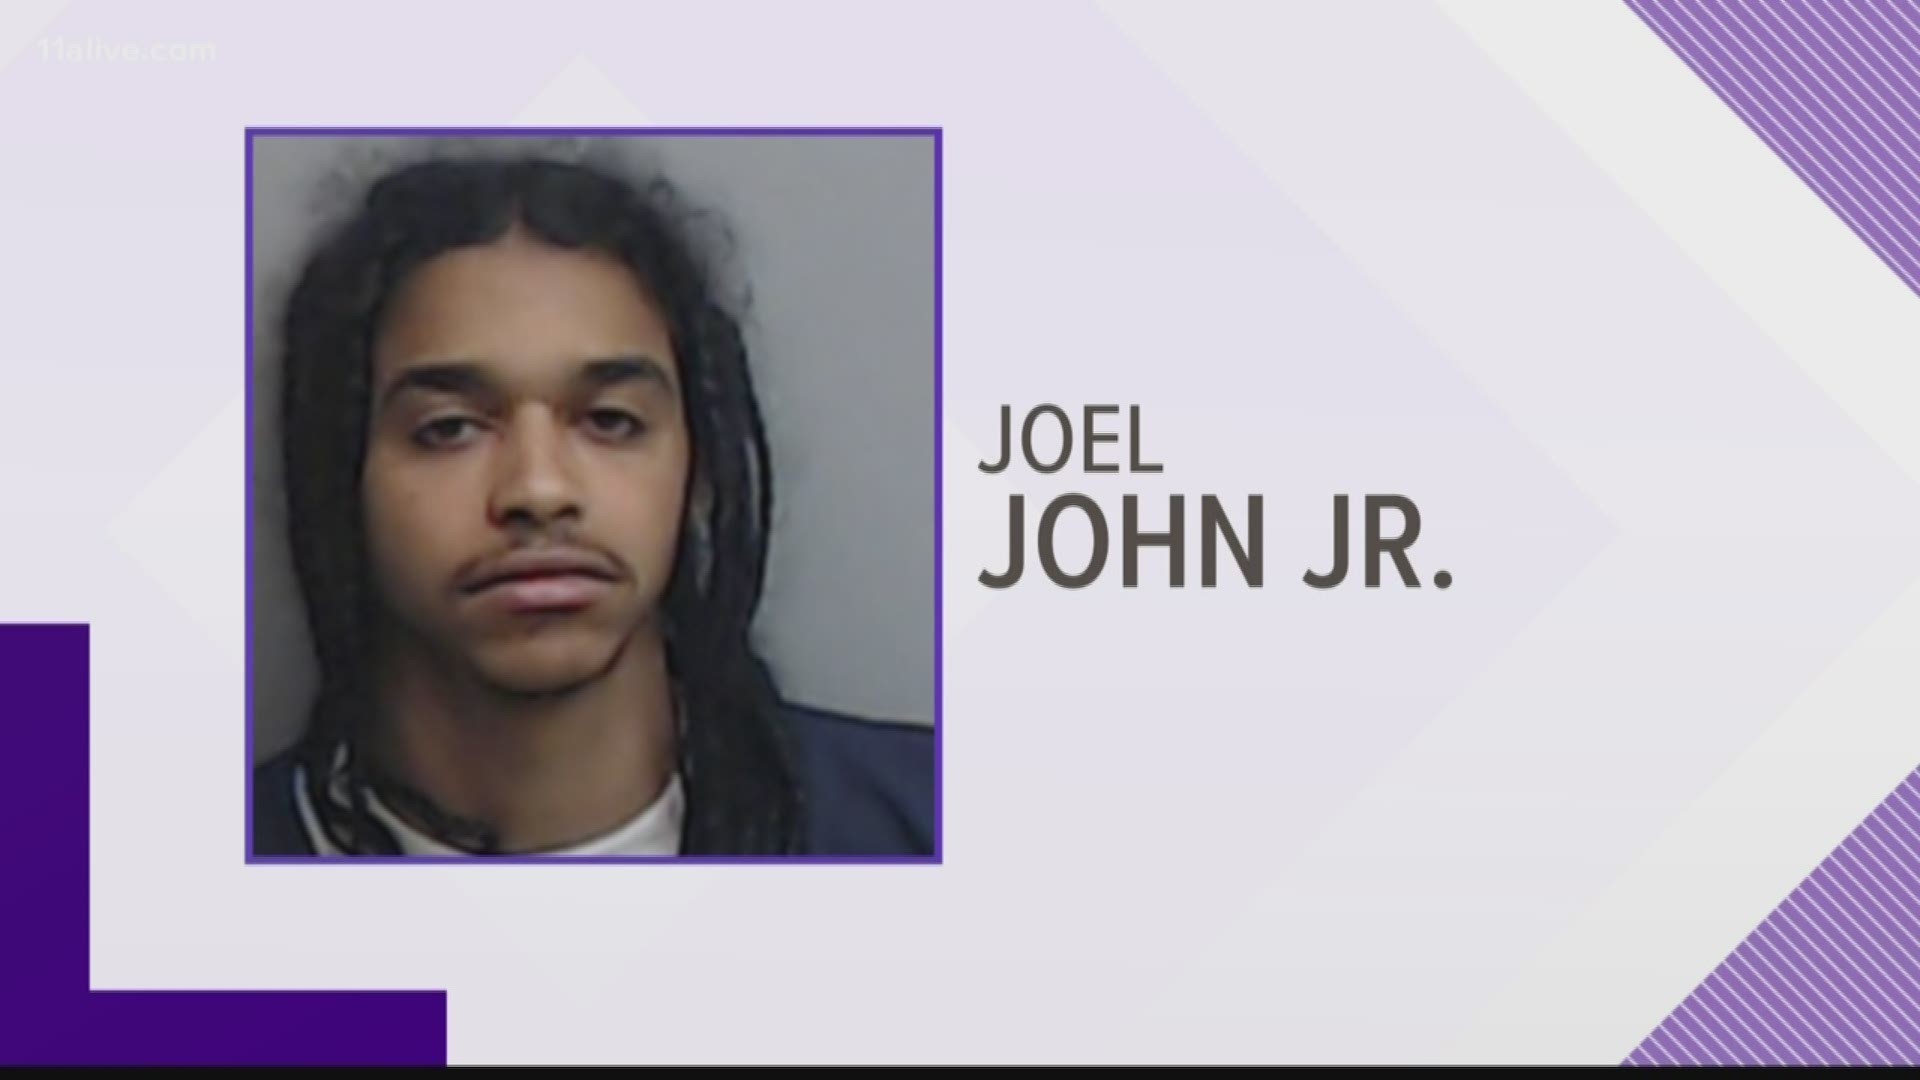 A driver is facing multiple charges after police said he struck and killed a pedestrian who was picking up trash early Monday morning.